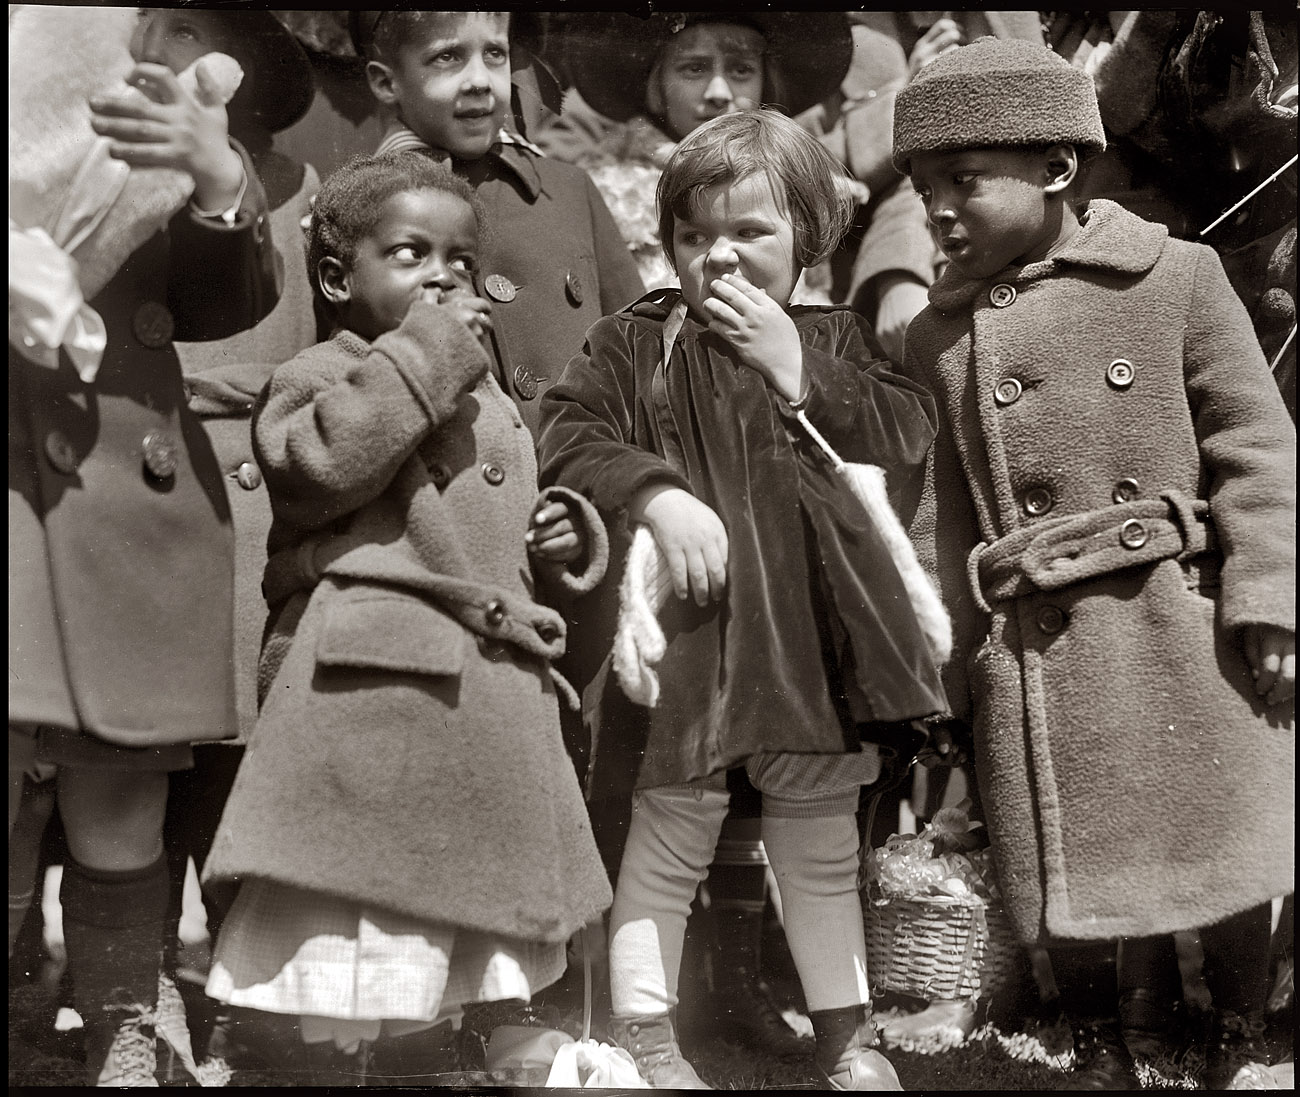 April 2, 1923. Children eating at the White House Easter egg roll in Washington. View full size. 4x5 glass negative, National Photo Company Collection.